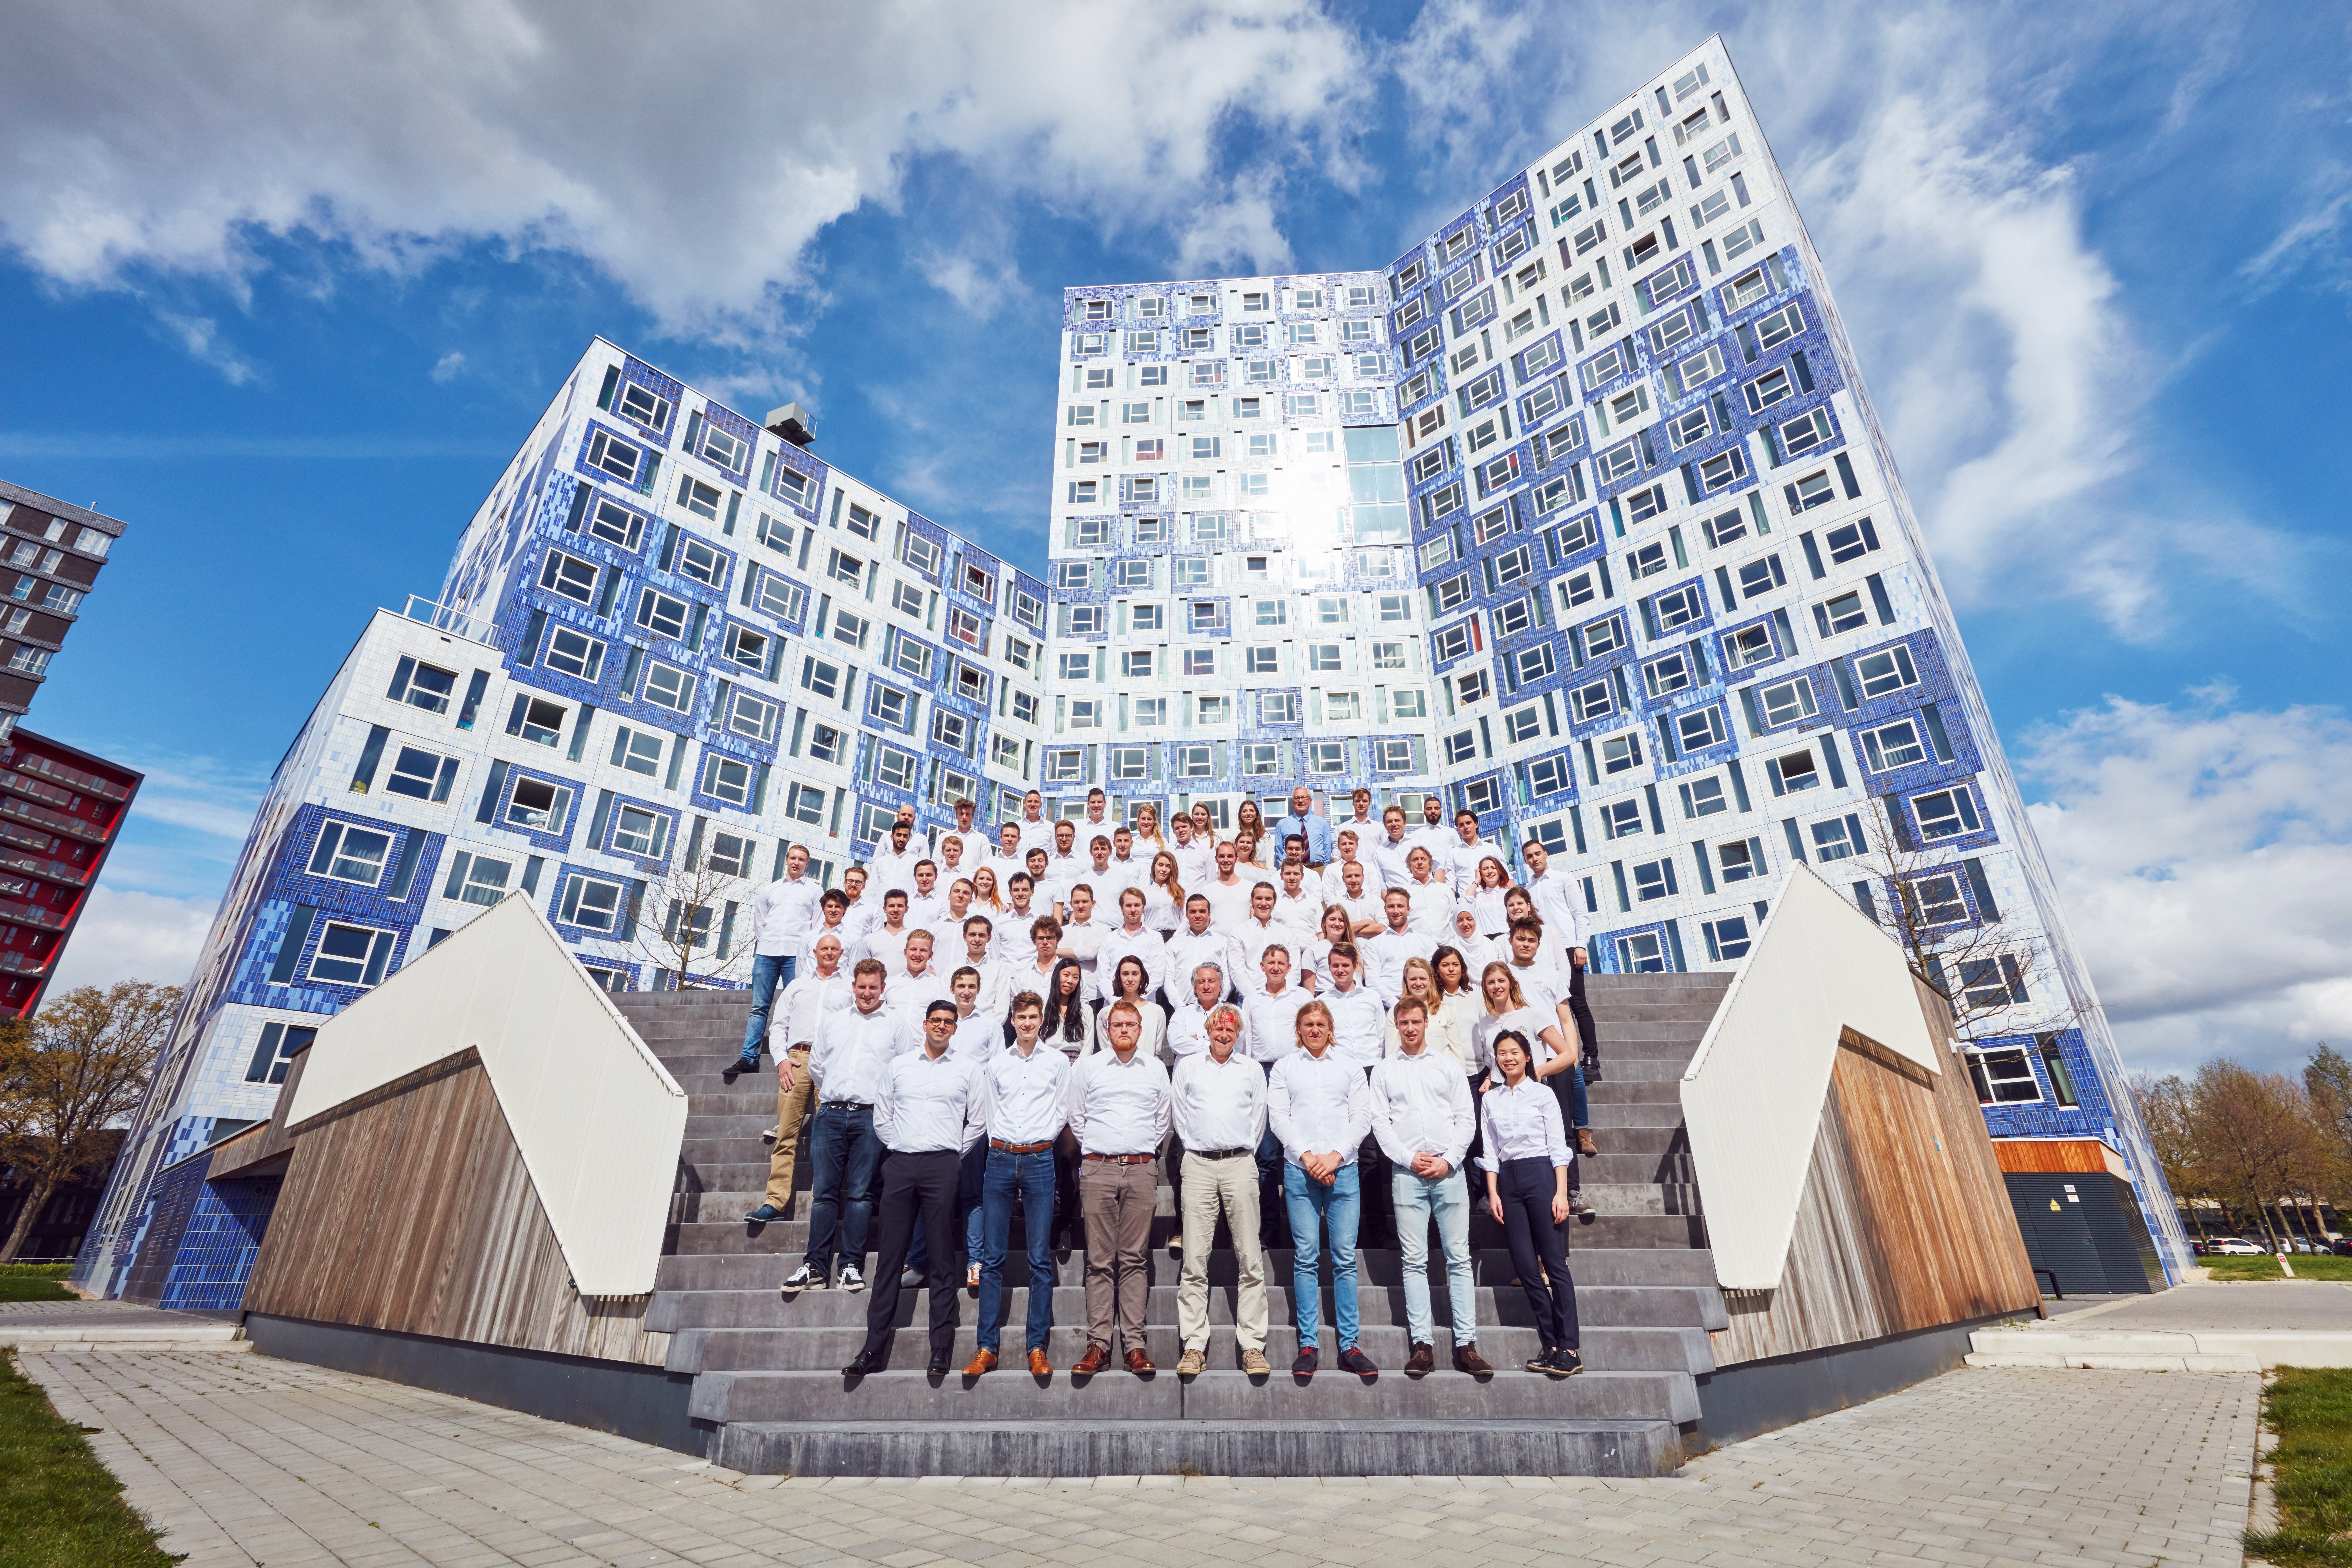 Group photo of the Netherlands team members for Solar Decathlon 2017.